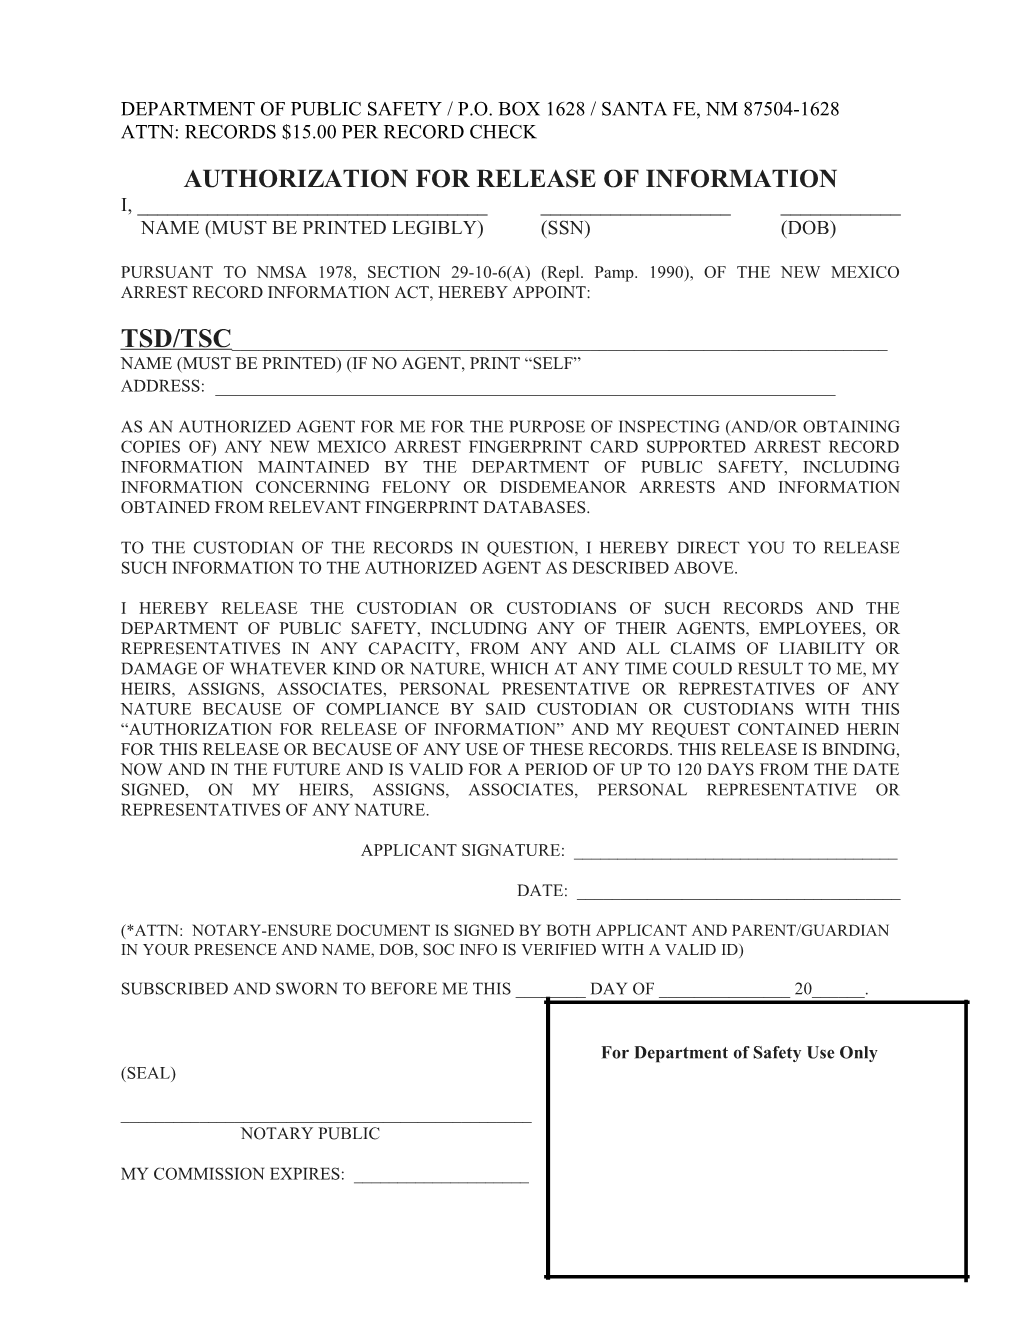 Authorization for Release of Information s5